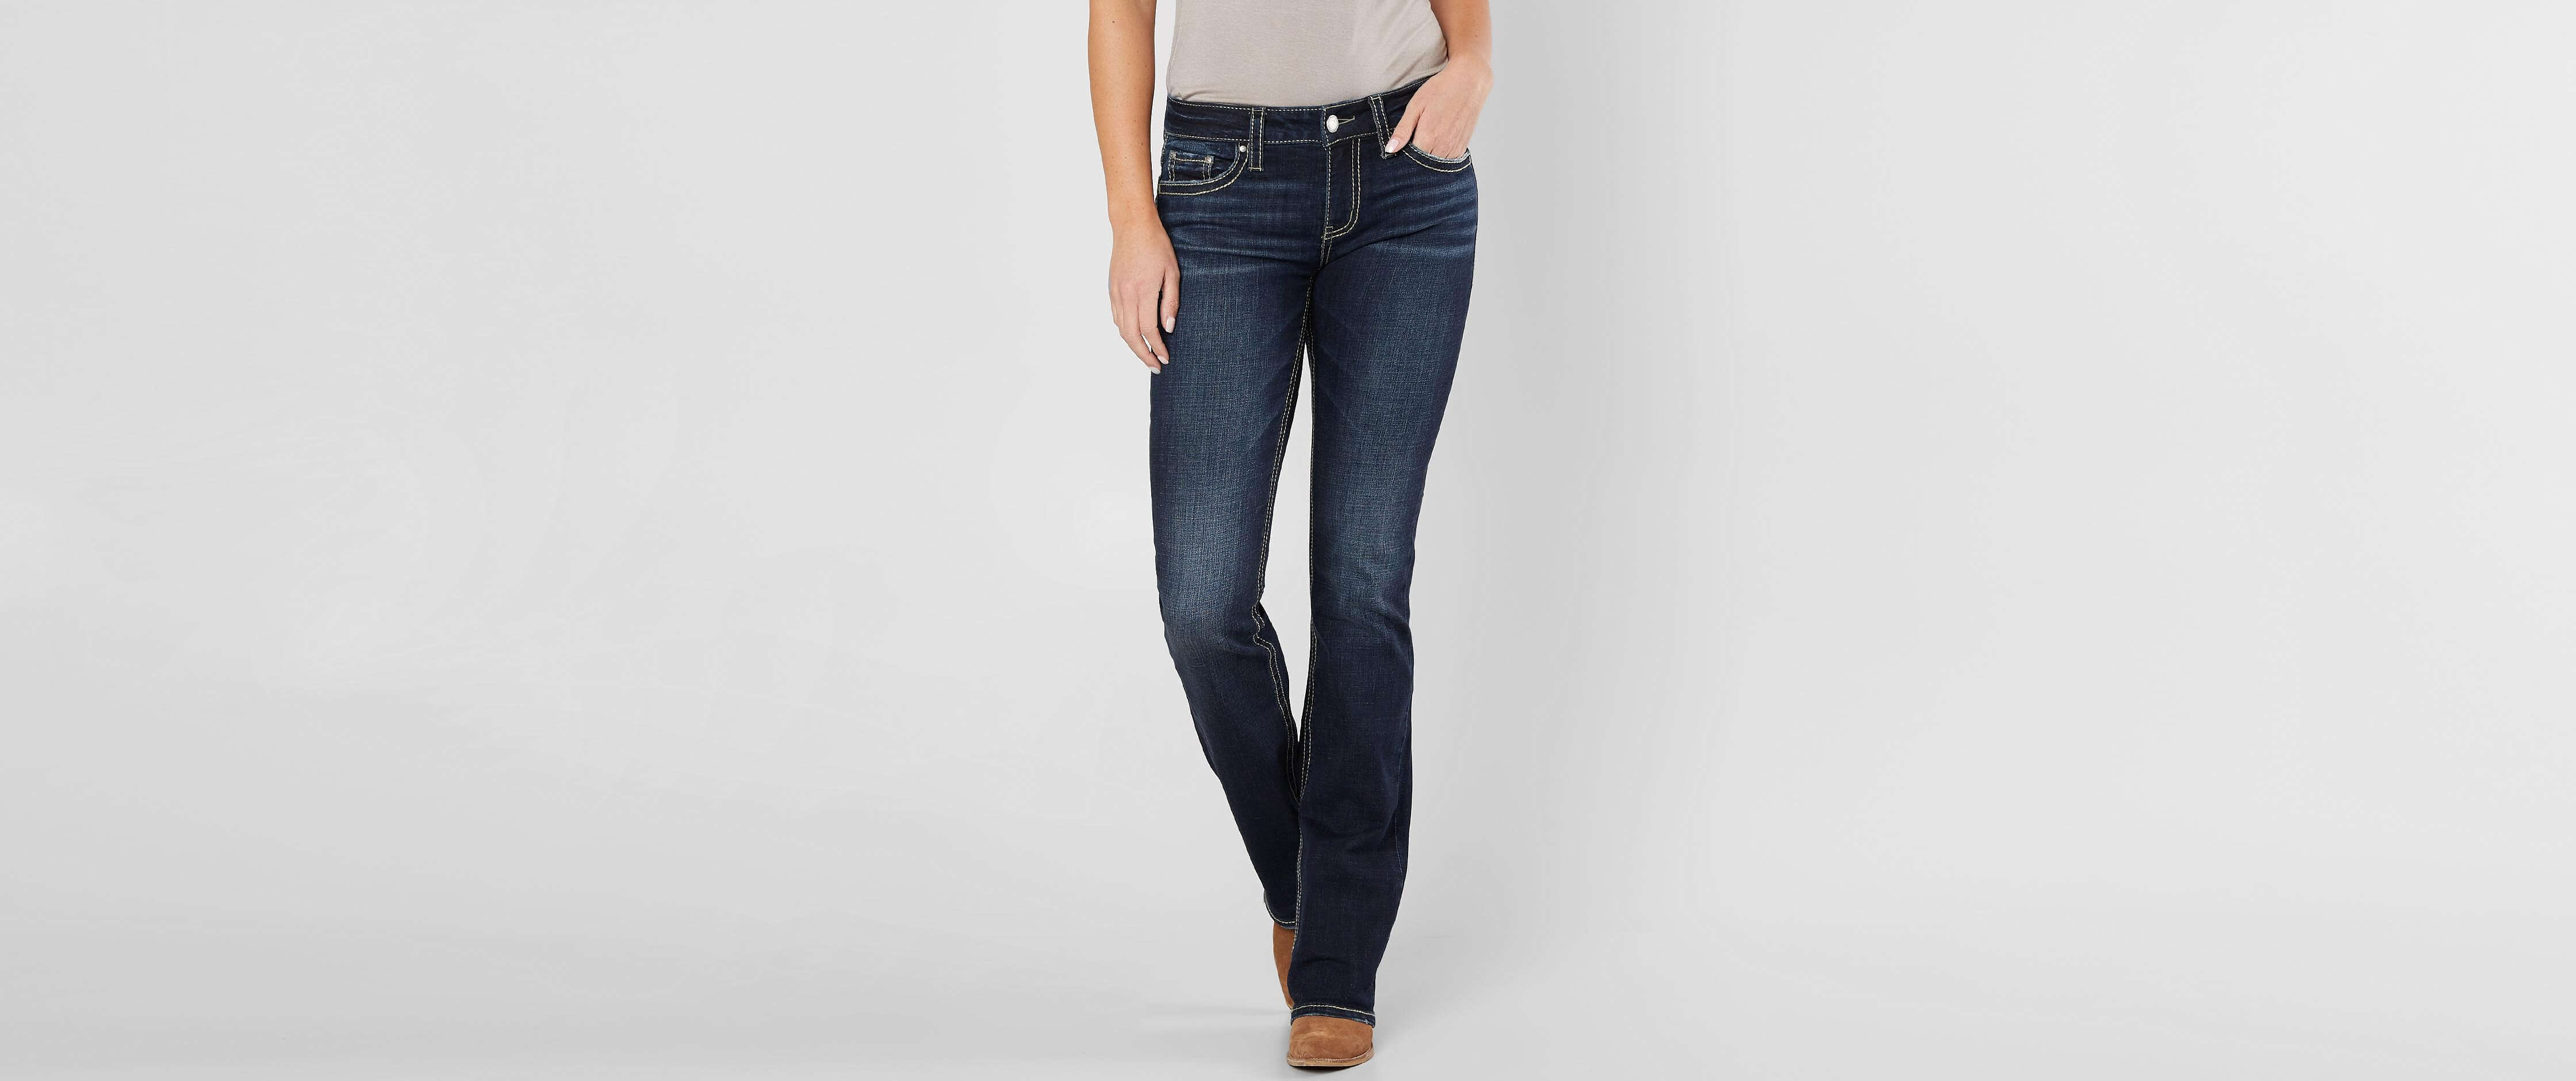 best jeans for petite girls